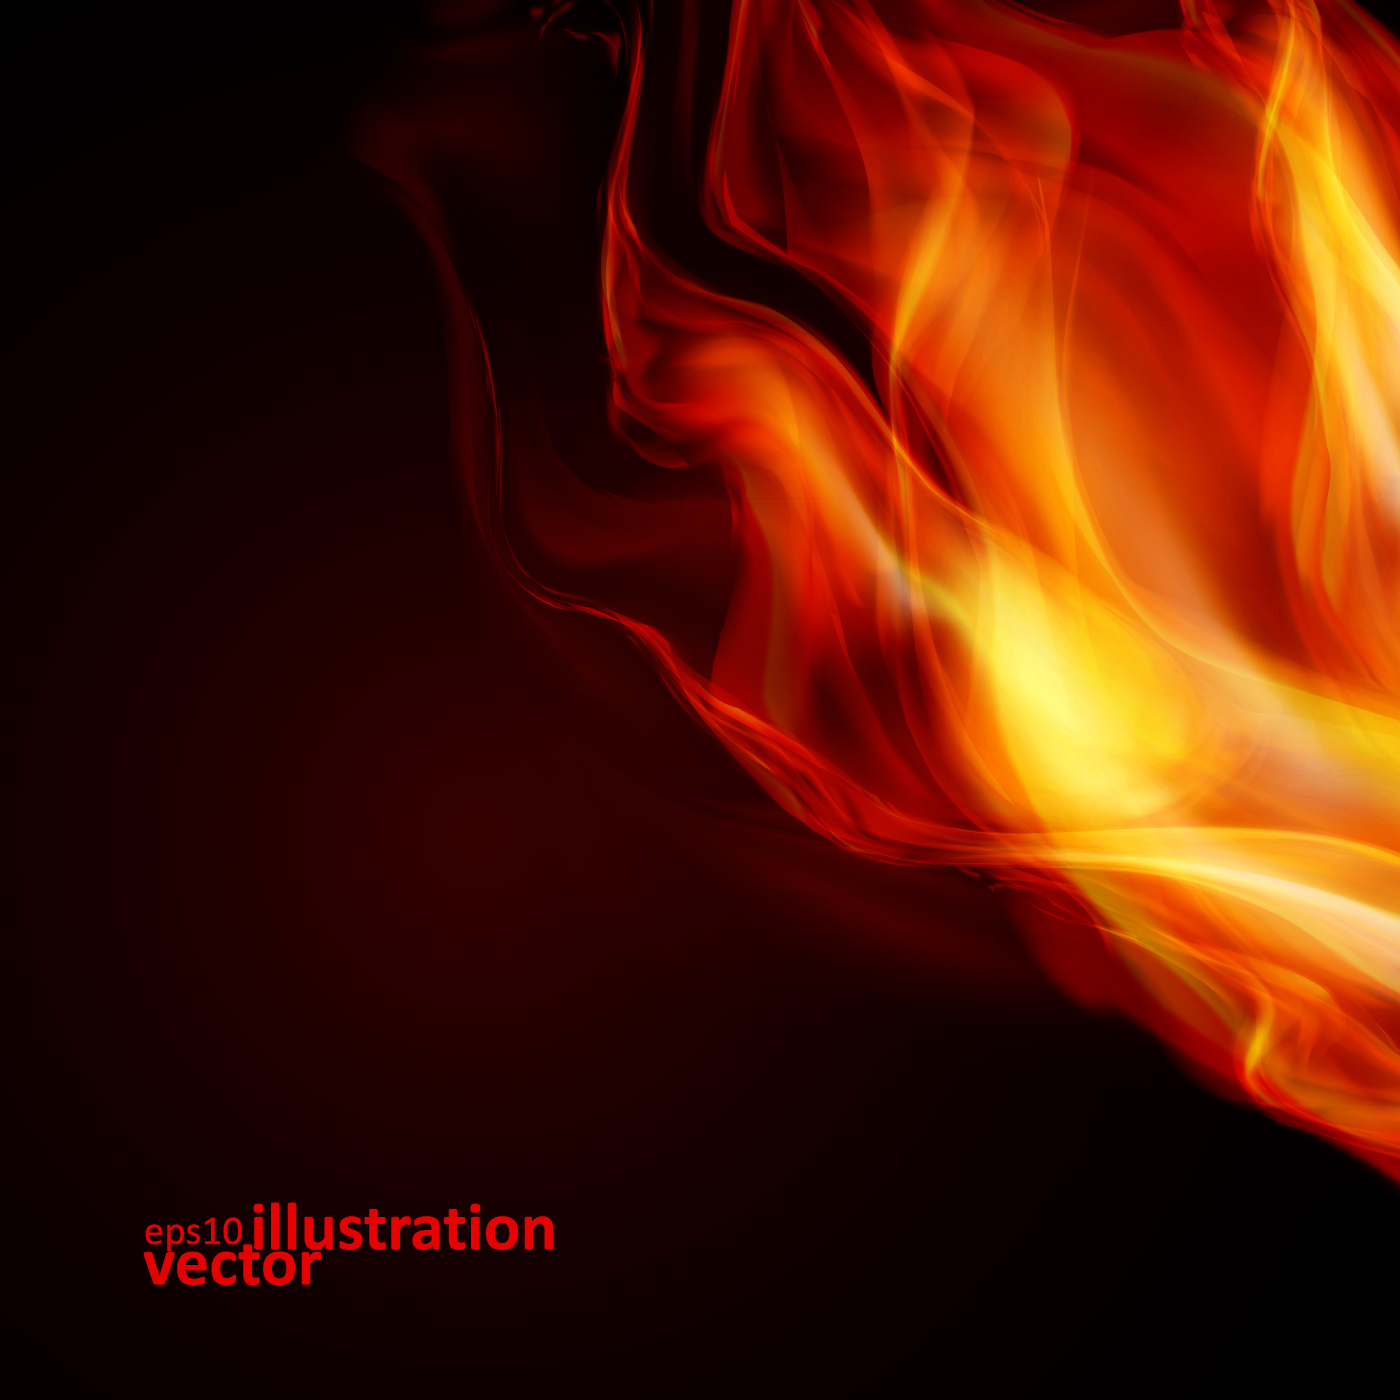 Realistic fiery background illustration vector 03